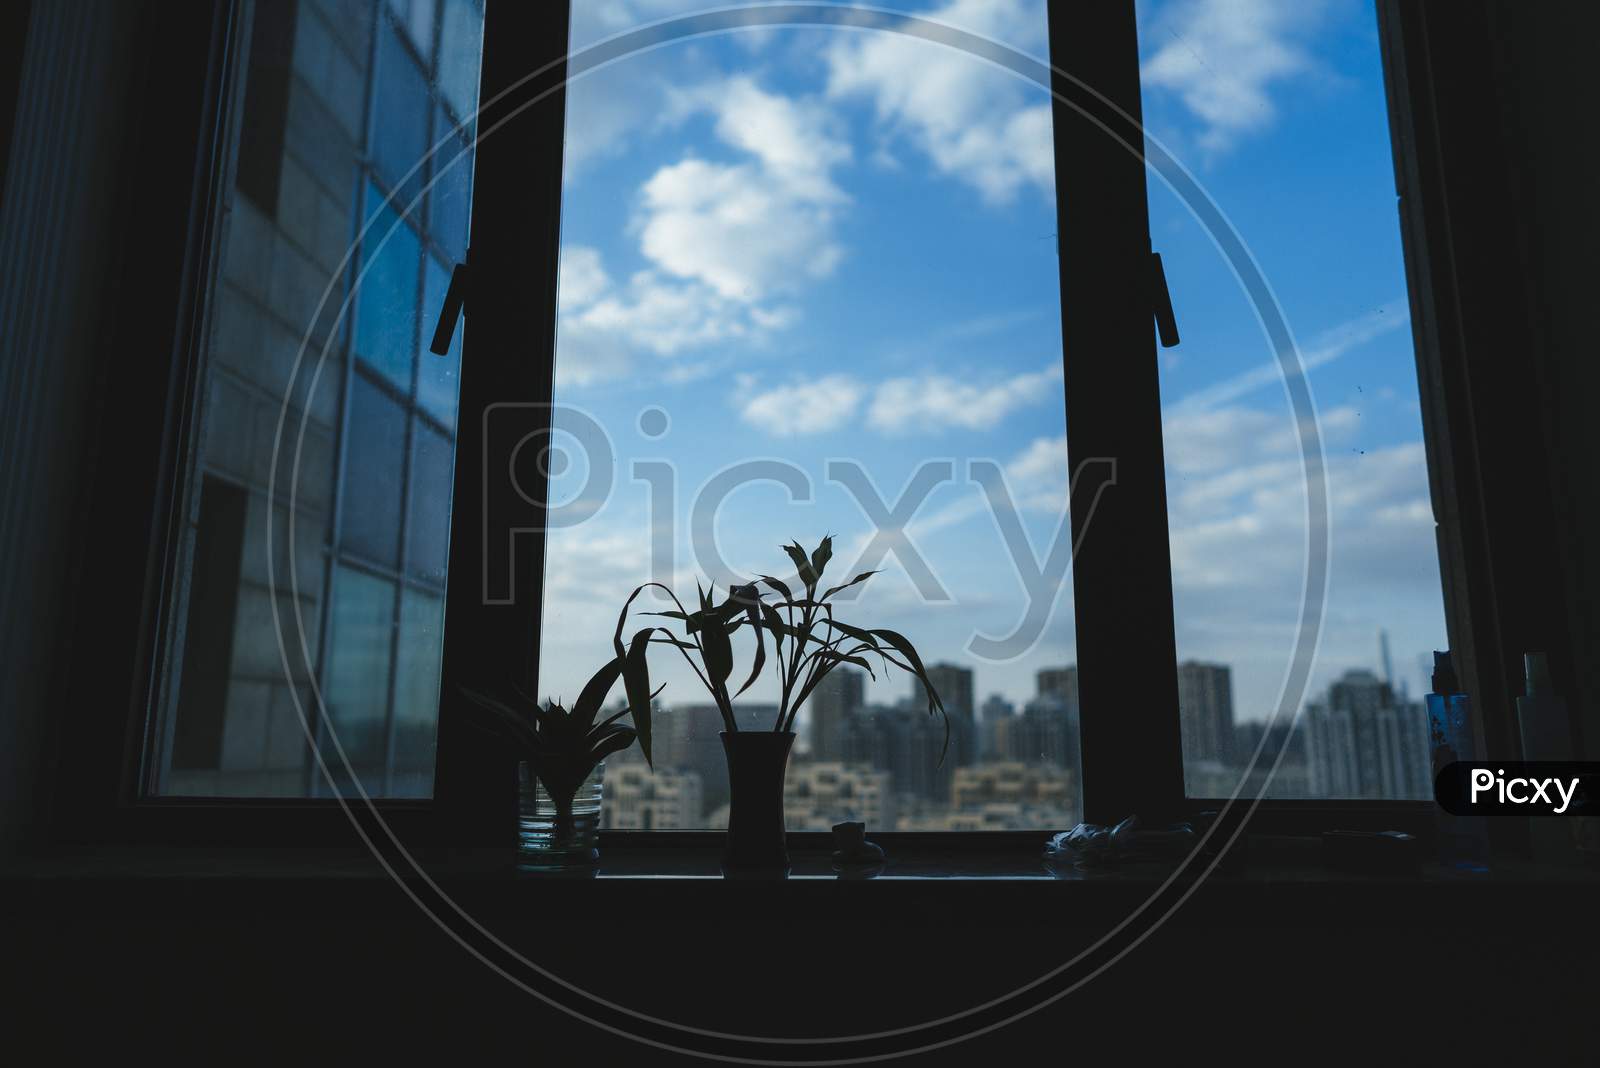 Small Plants To Decorate The Apartment Window. A Simple But Calm View. Seen From The Angel Below With A Little Silhouette With Lighting That Will Darken Slowly.